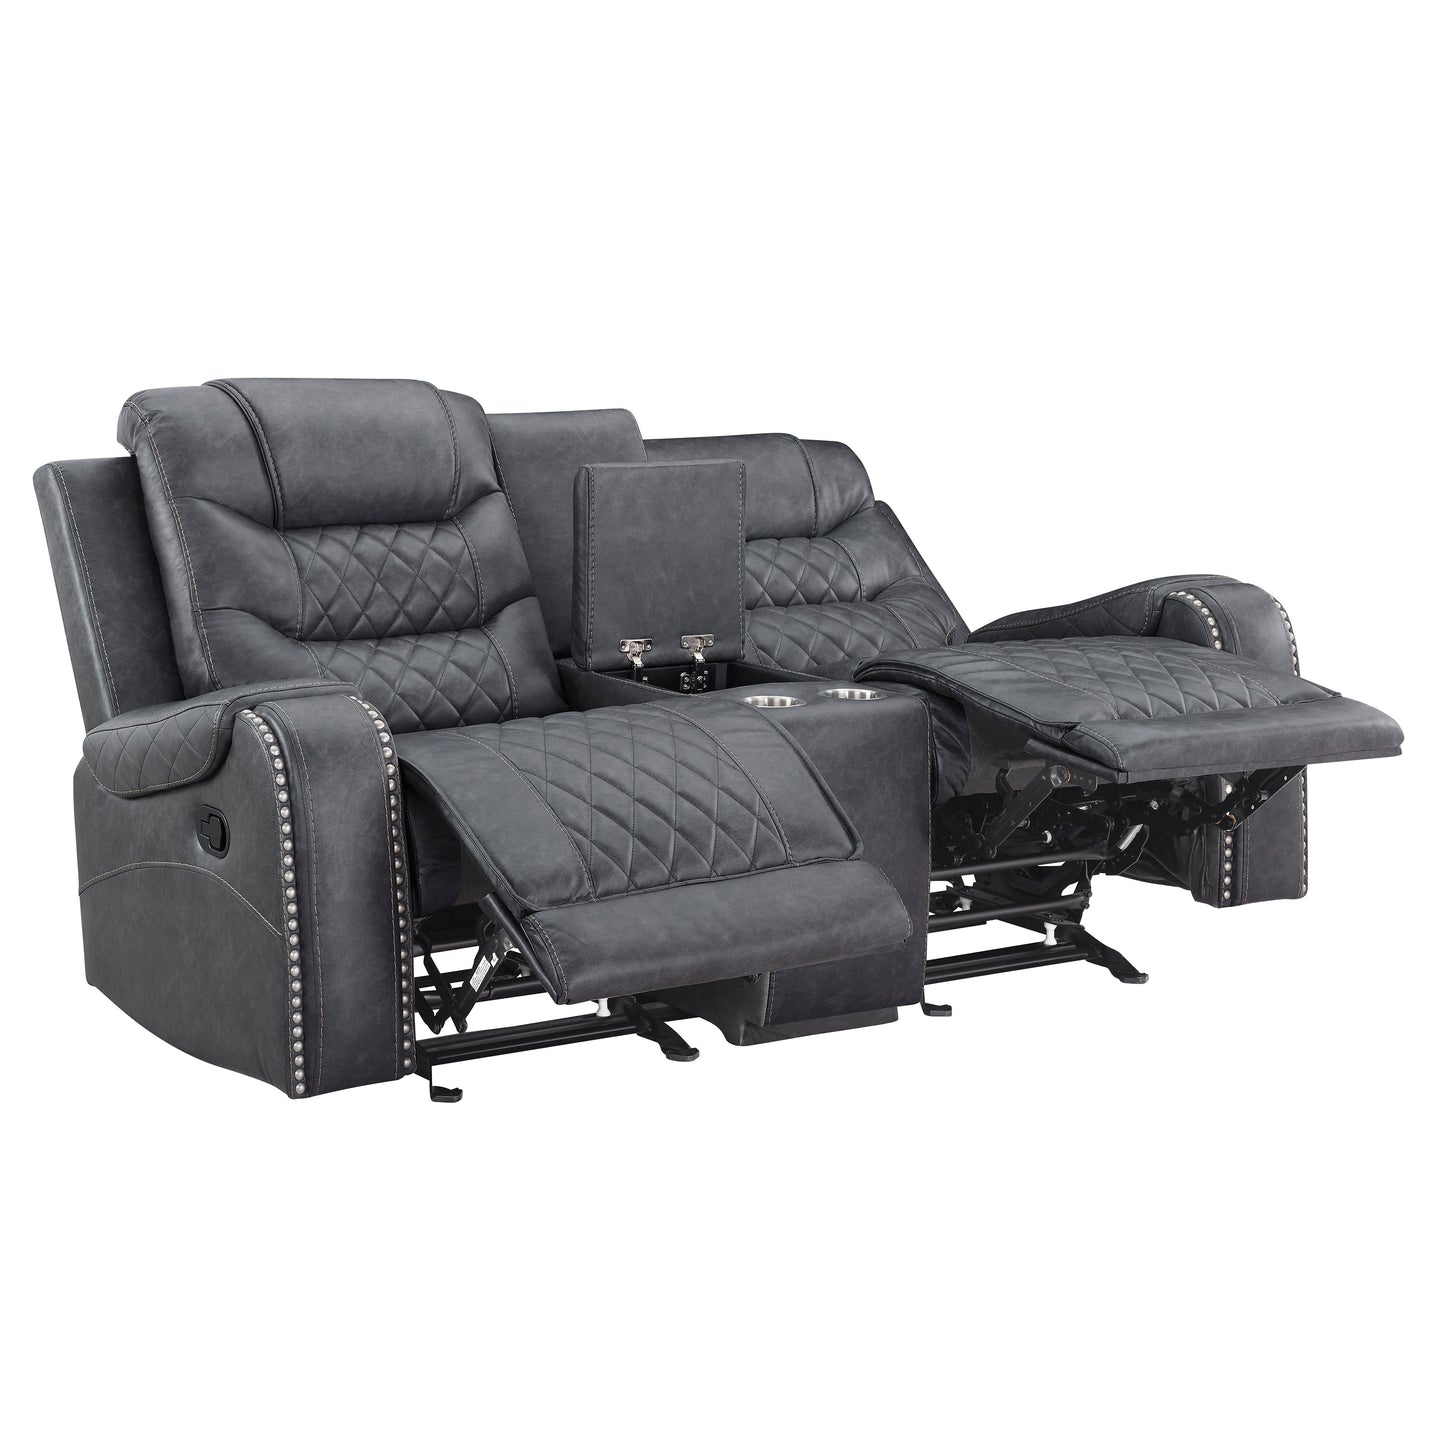 Klens Faux Leather 3-Piece Reclining Living Room Collection with Nailhead Trim, Gray